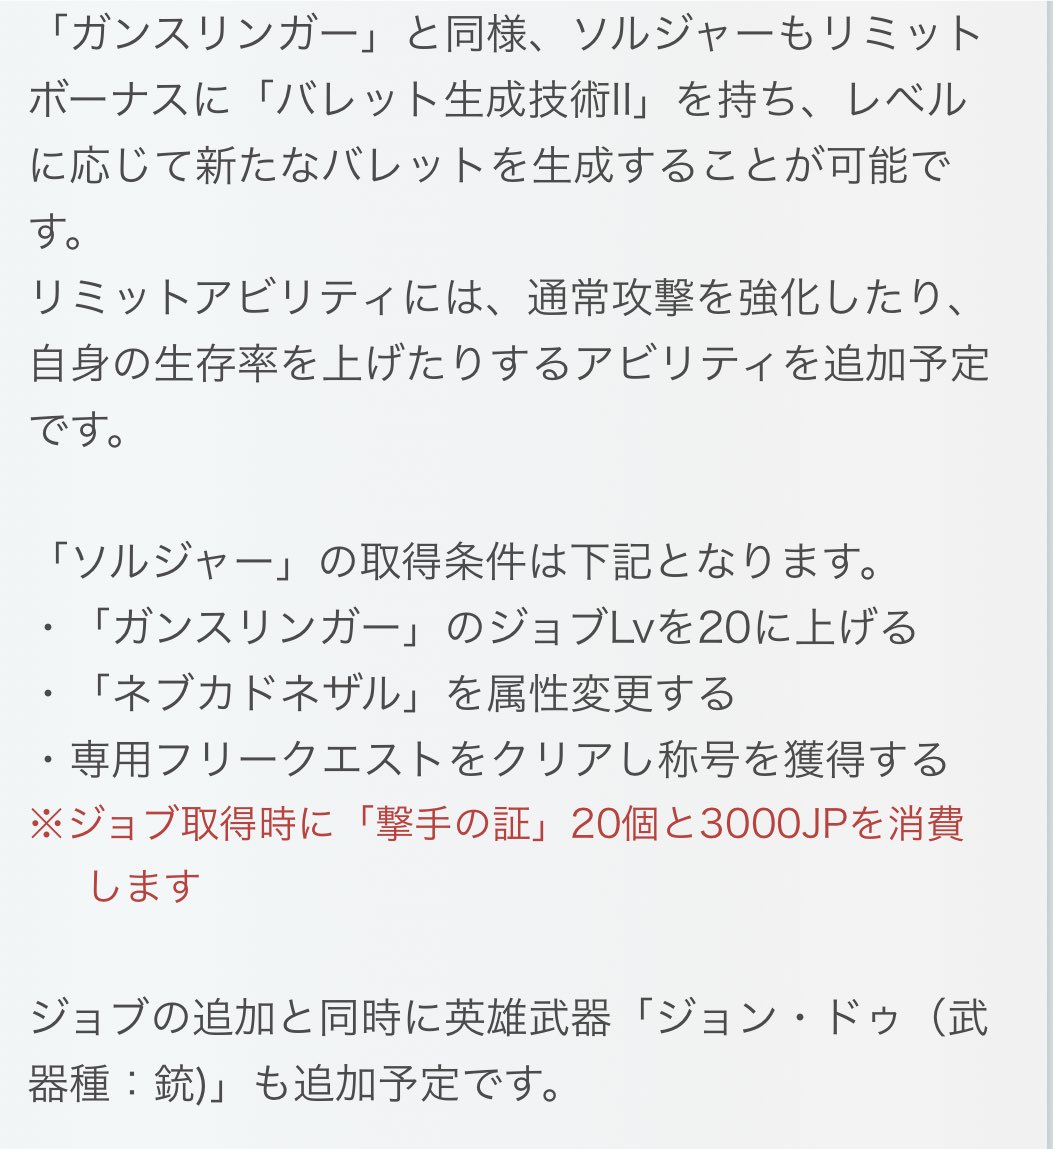 Granblue En Unofficial Soldier Emps Will Include Boosts To Normal Attacks And Boosts To Survivability To Unlock The Class Gunslinger To Level Element Change A Nebuchad Clear A New